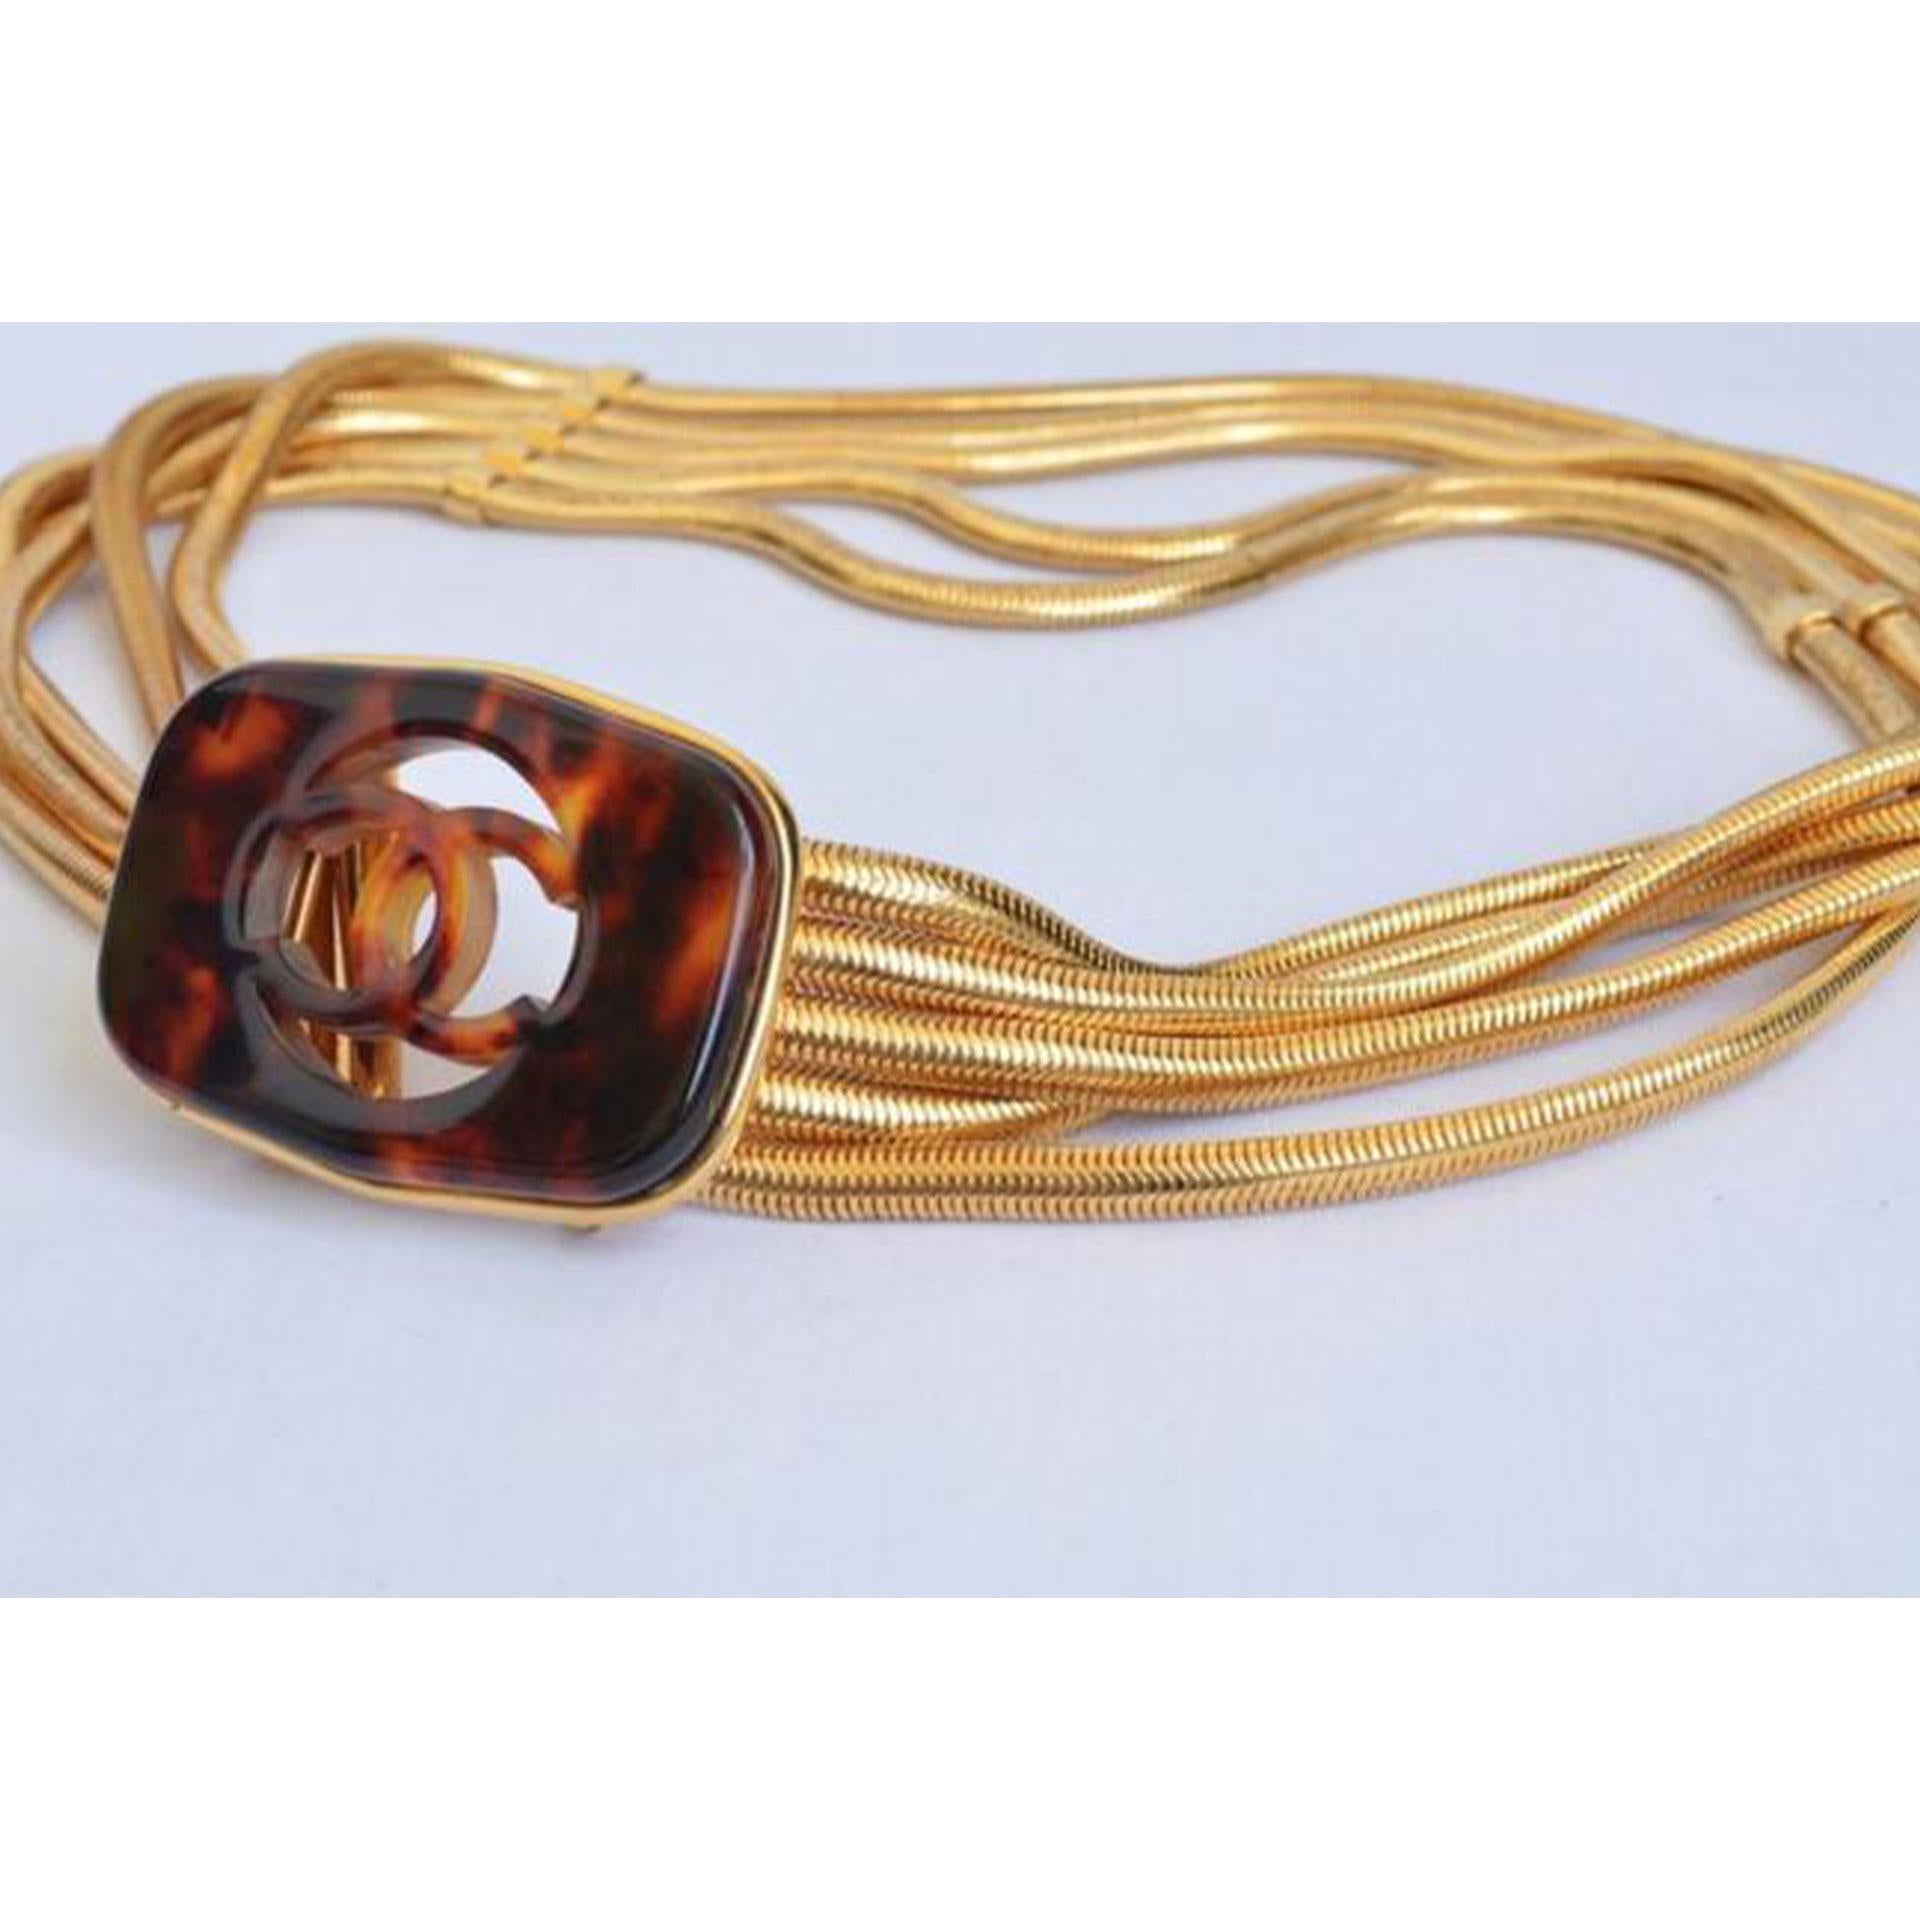 Add a splash of regal, ultra stylish appeal to your ensemble with this belt! We love the tortoise shell - it really adds such a gorgeous textural feel to the piece!

Designer: Chanel
Condition: Excellent. 
Content: Metal
Color: Gold
Fits Waist Size: